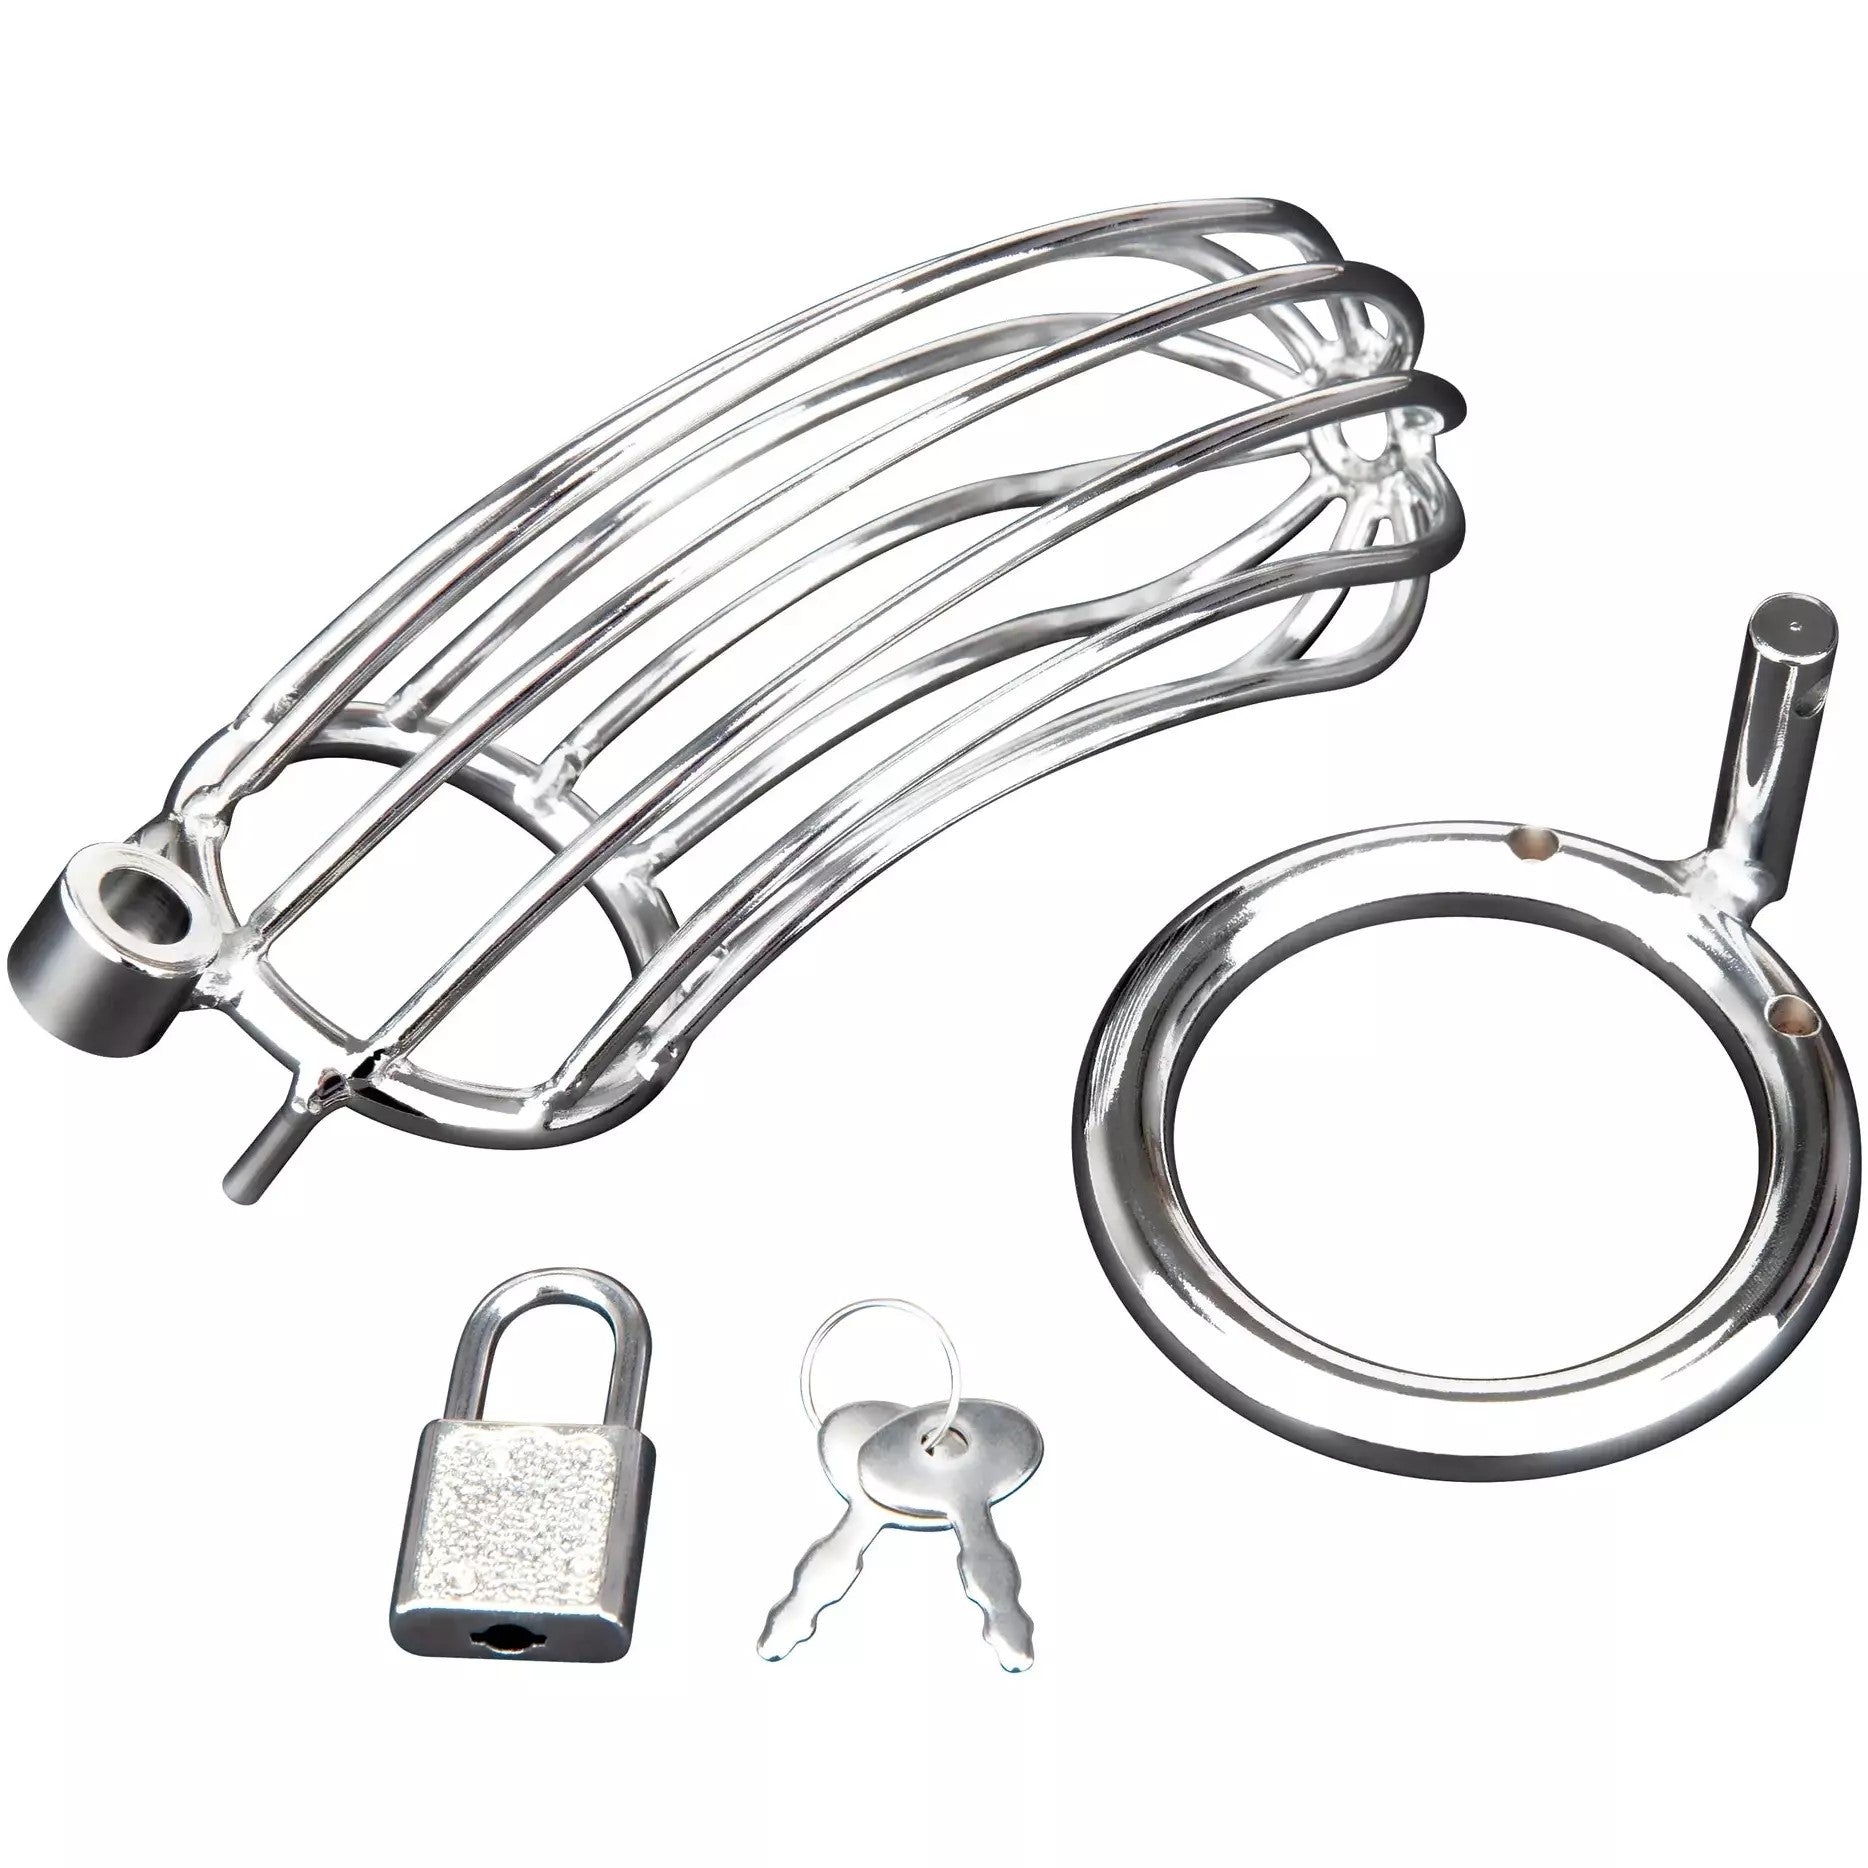 Image shows the silver cock cage disassembled. There is a penis shaped cage with silver bars that run from the base to the tip of the penis, a silver bar, a silver lock and two silver keys.